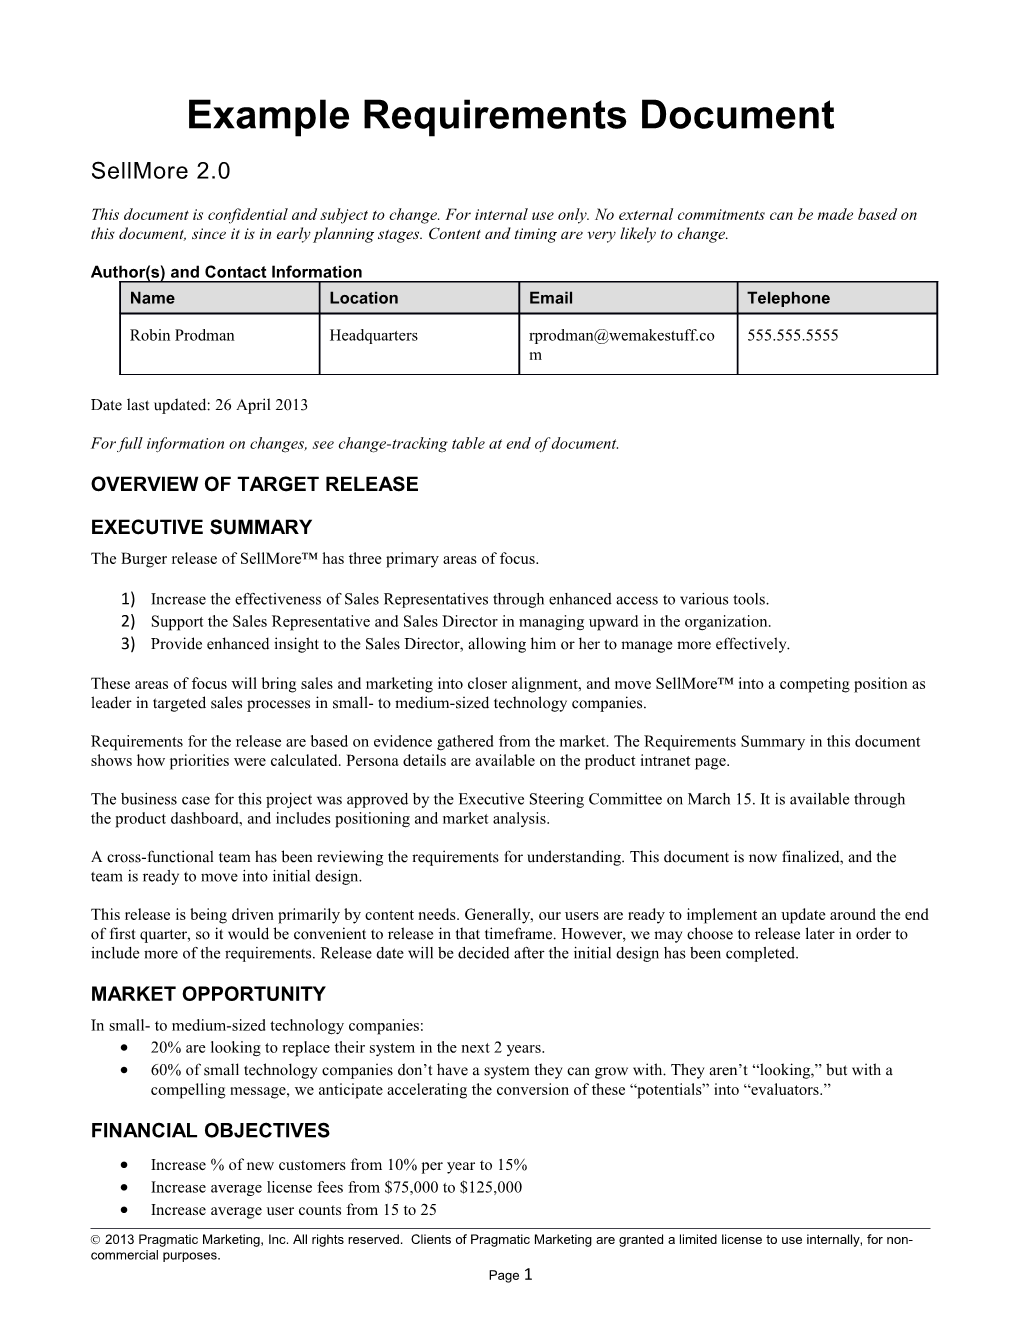 Example Requirements Document